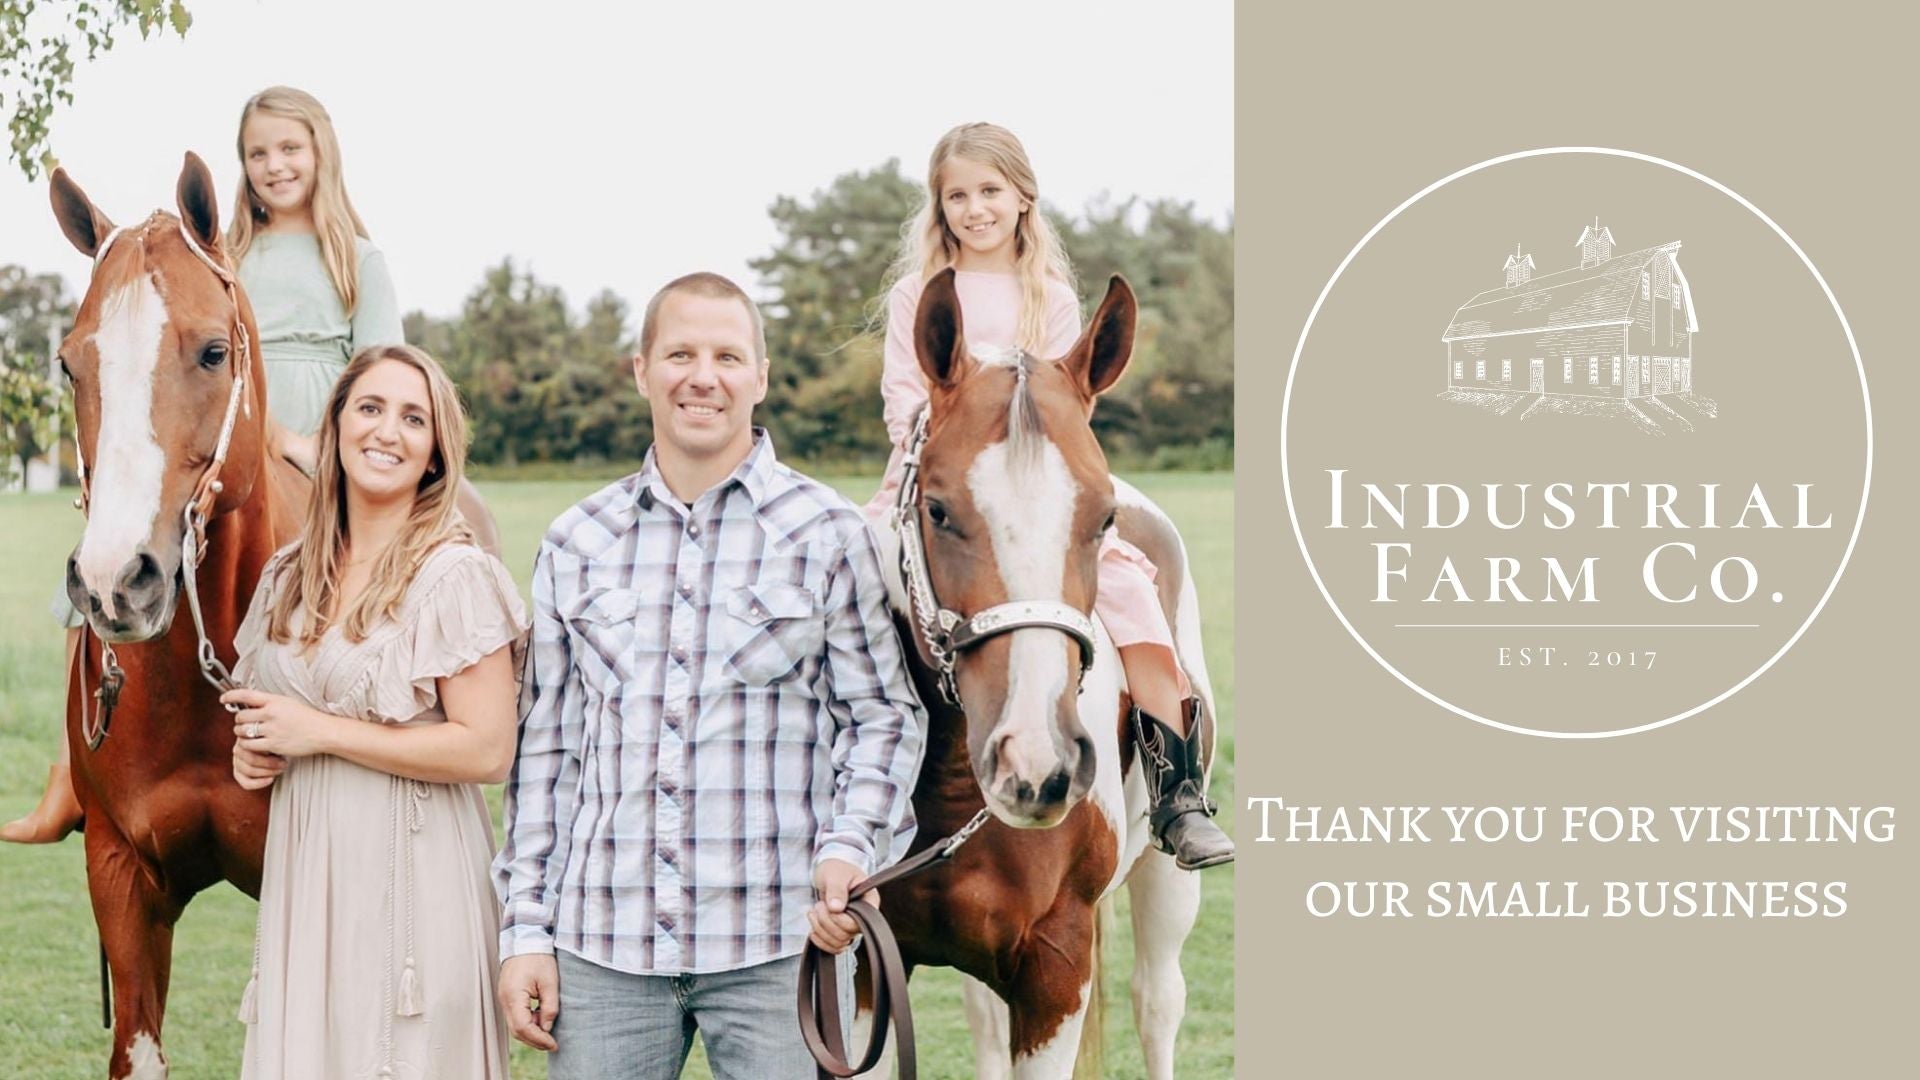 Support a small family business by shopping industrial farm co